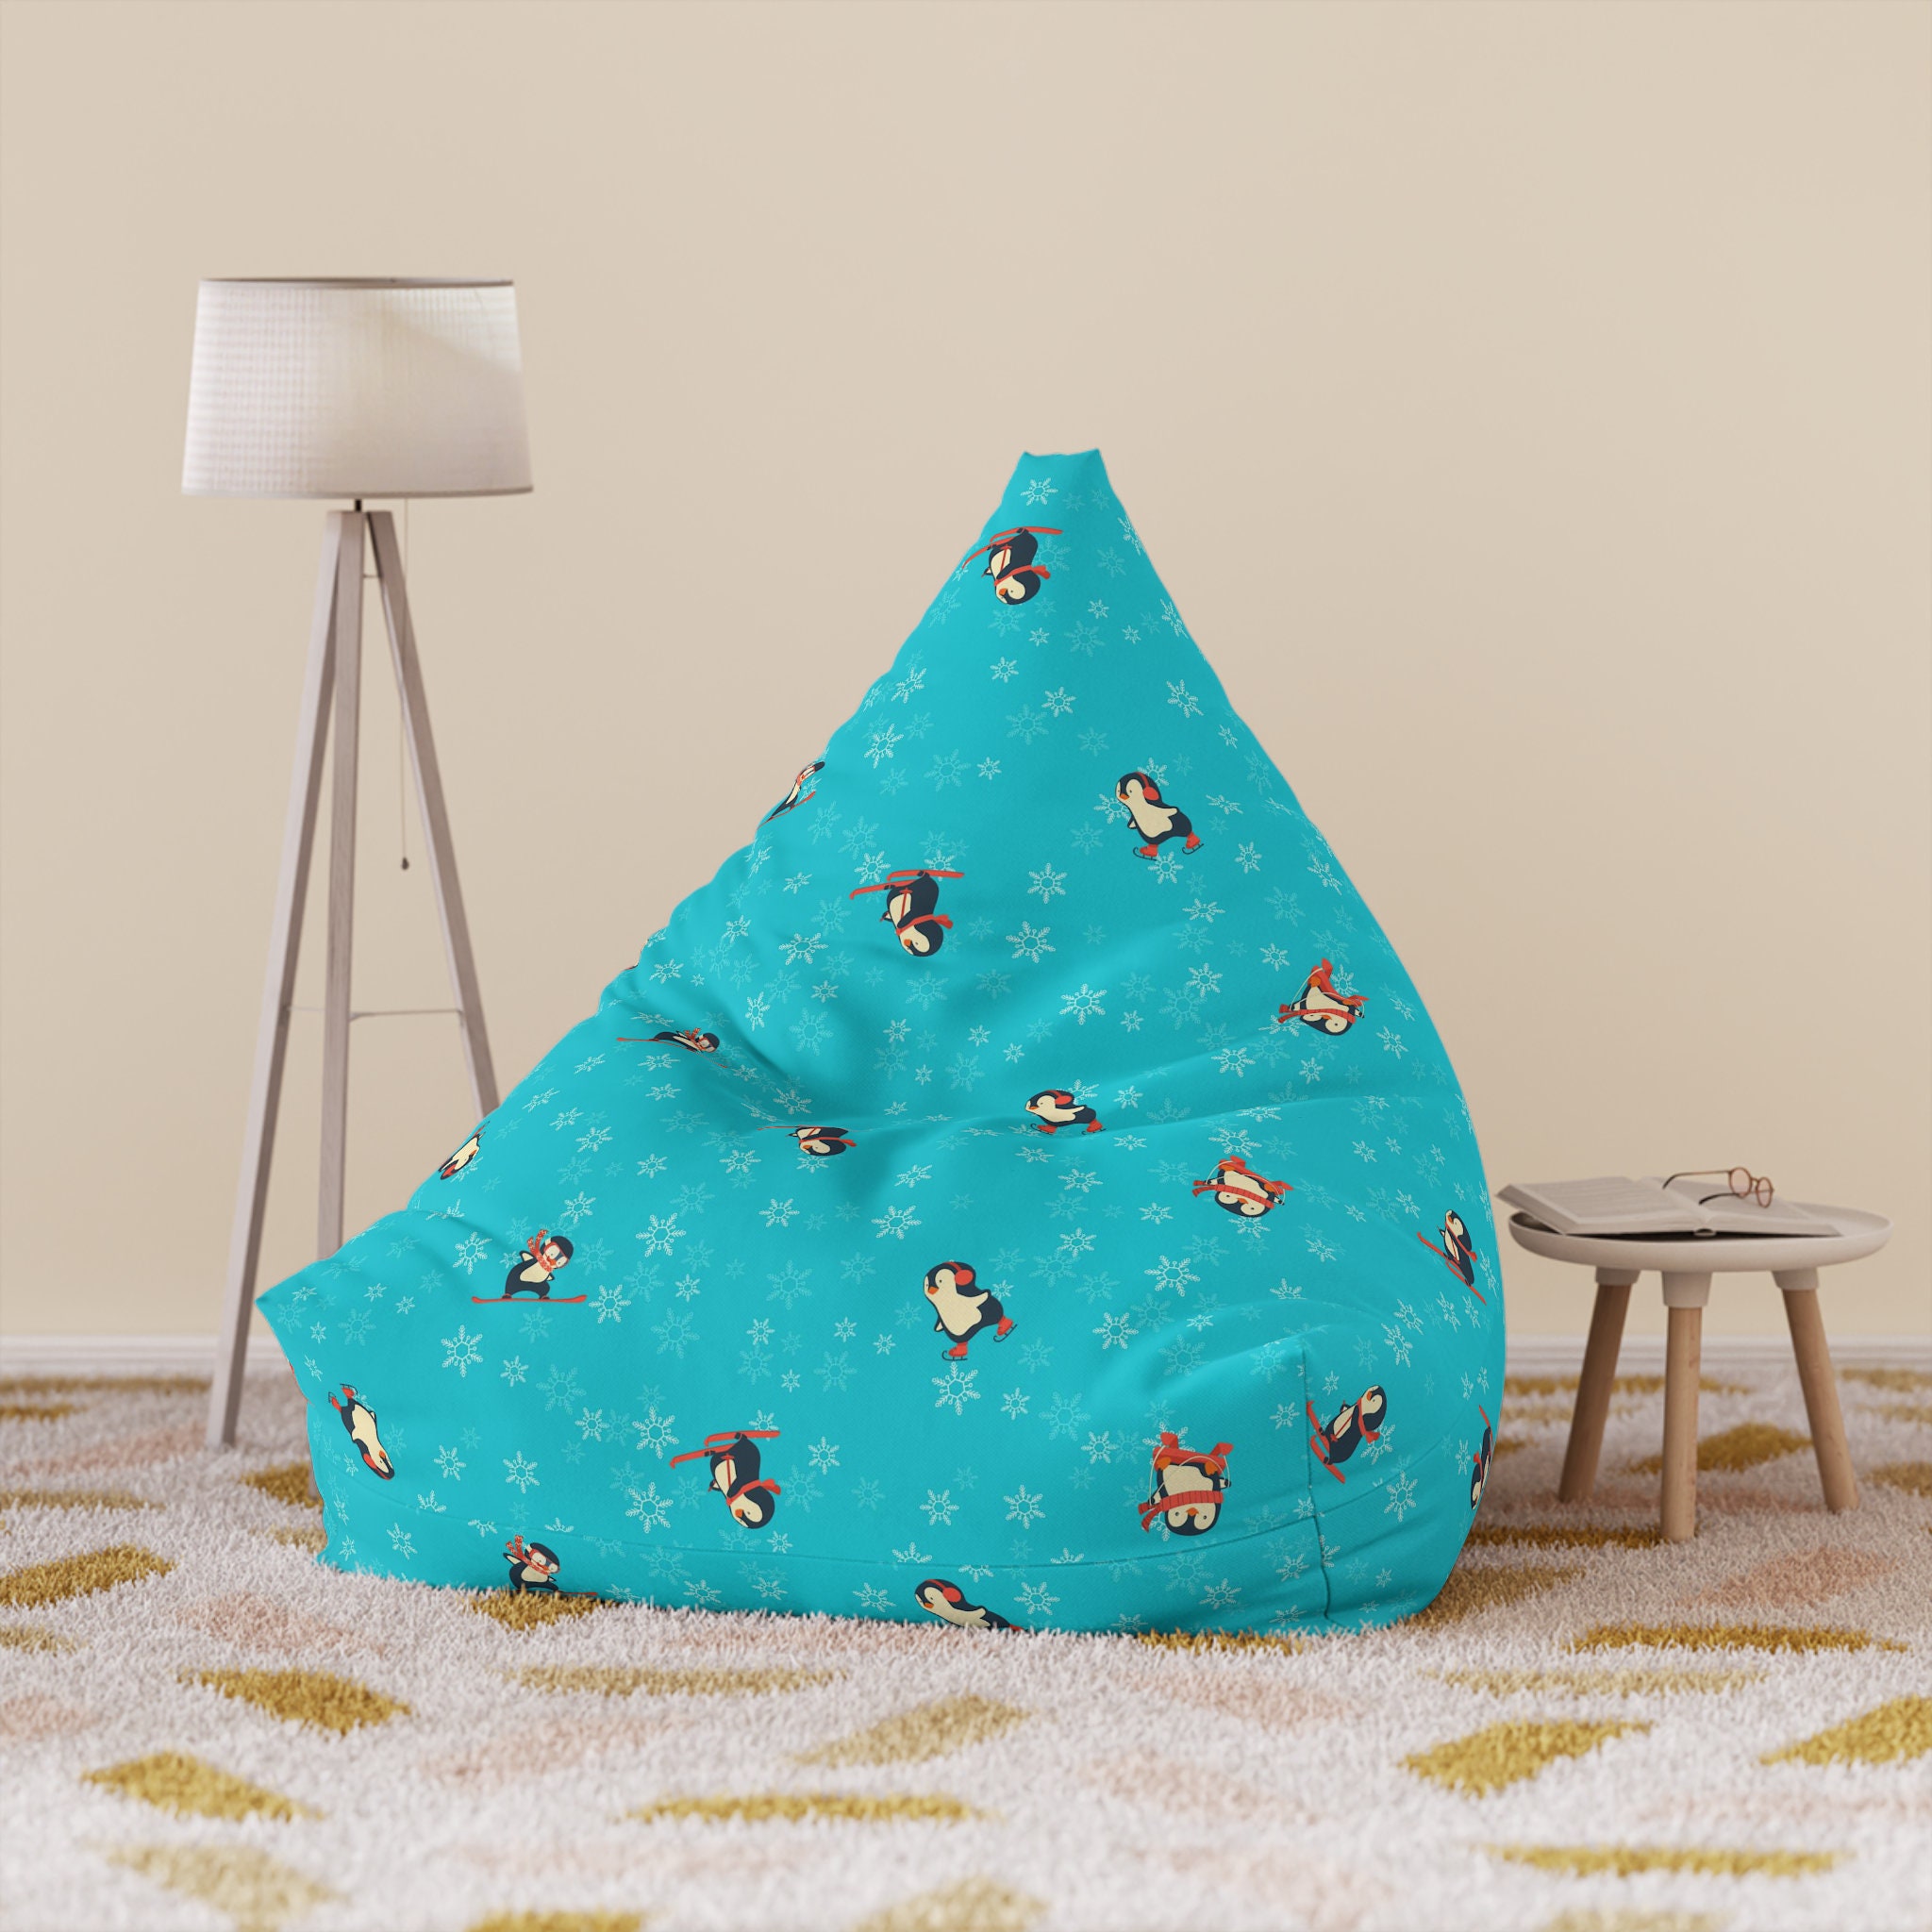 Stitch Bean Bag Chair  Family project, Family guy, Bag chair